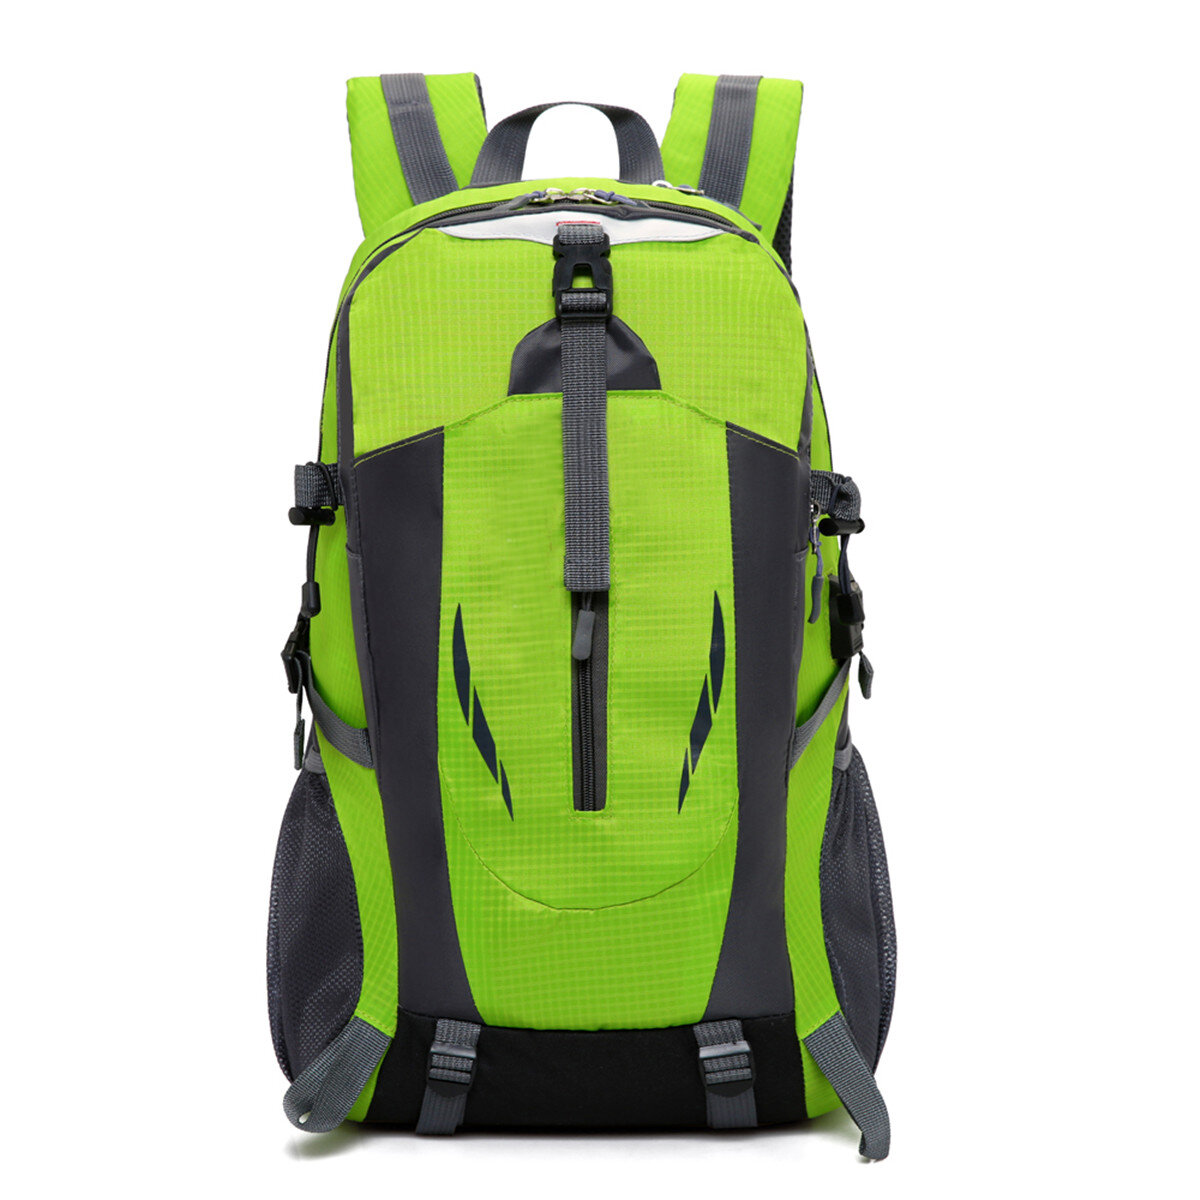 Water-proof Backpack Large Capacity USB Charging Corful Outdoors Travel Laptop Bag for 15.6 inch Not